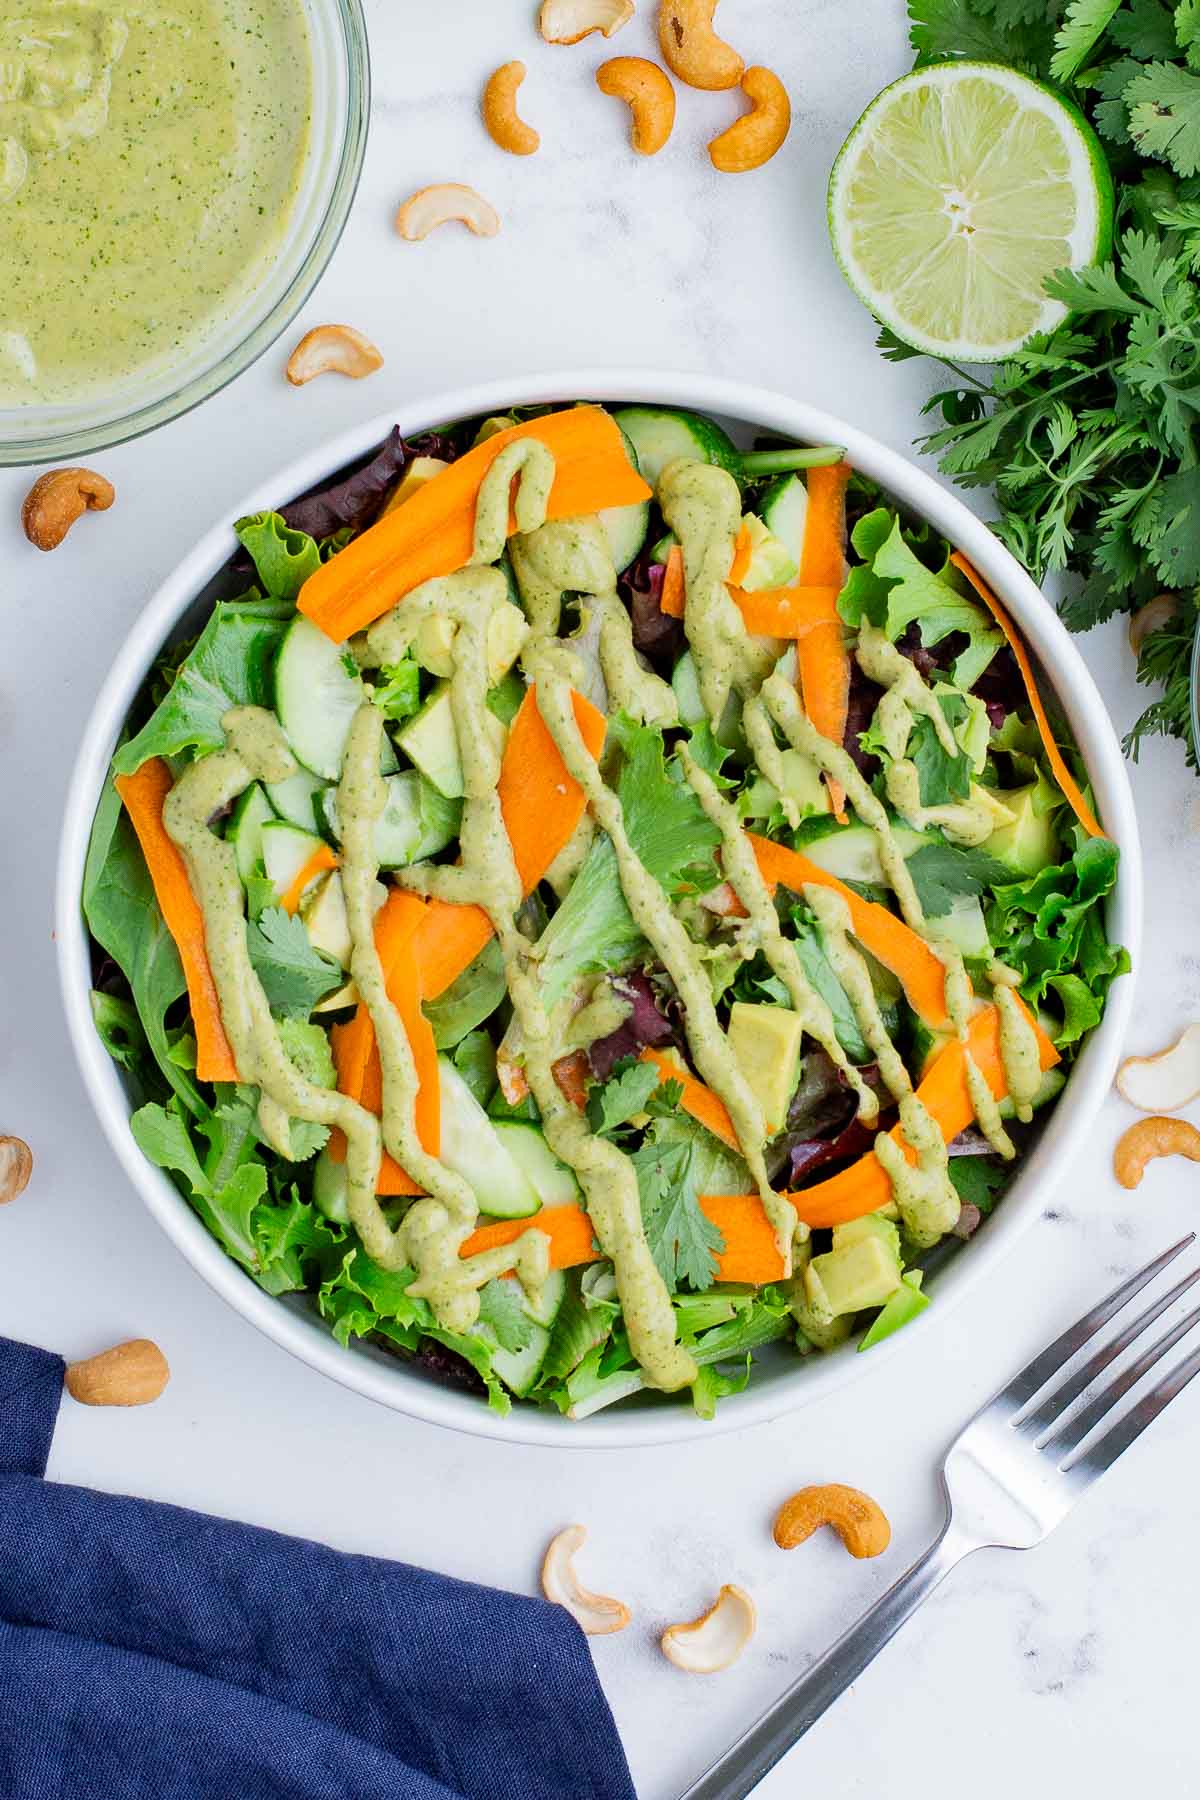 Spicy cashew dressing accompanies a bowl full of greens and vegetables.